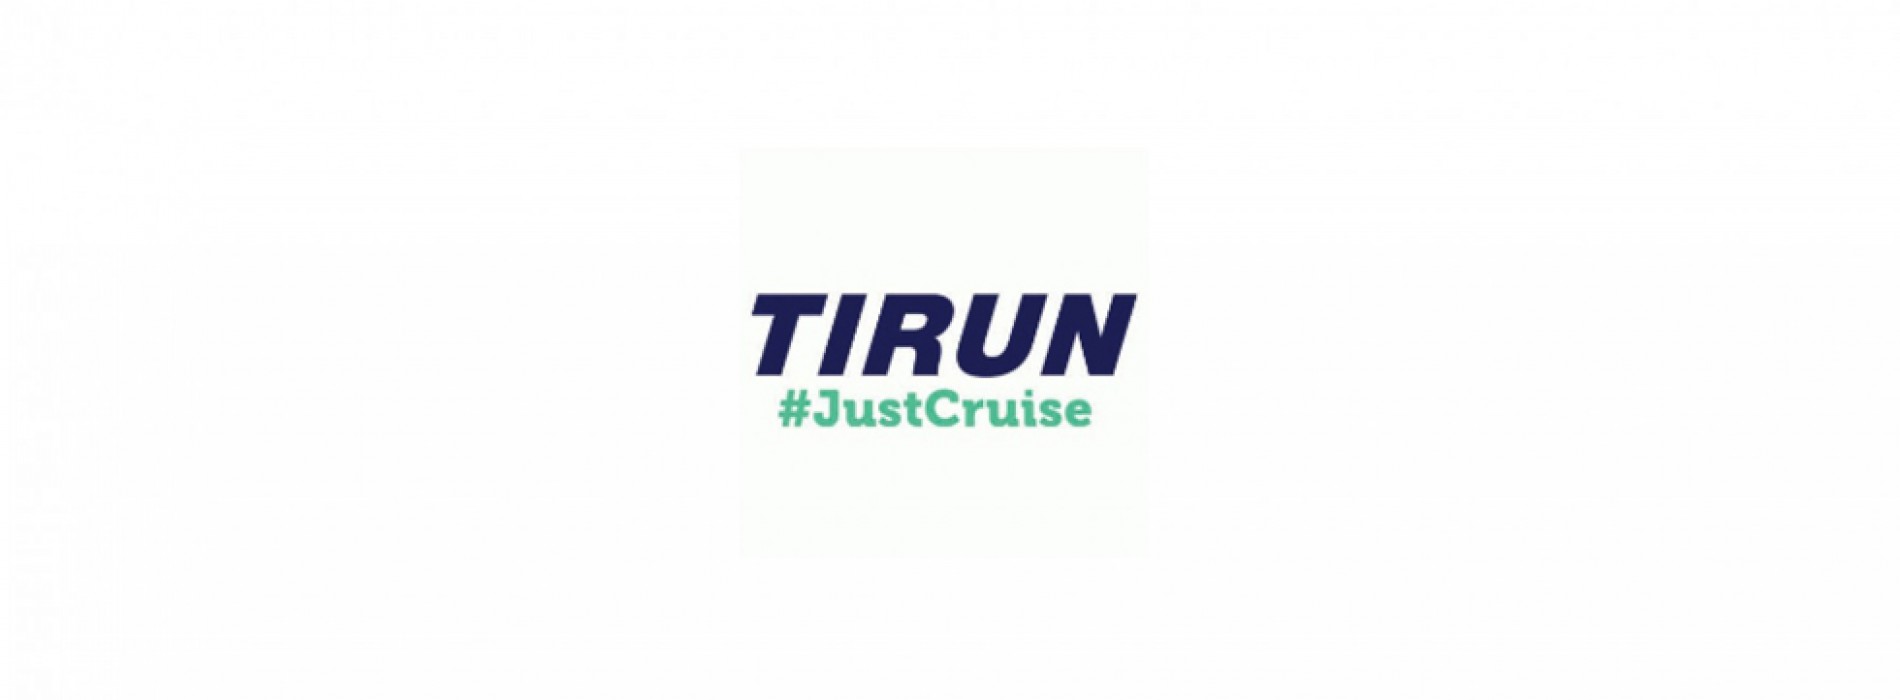 TIRUN partners with Singapore Airlines and Singapore Tourism Board to owning to increasing craze offers exciting prices for premium ‘Fly Cruise’ packages